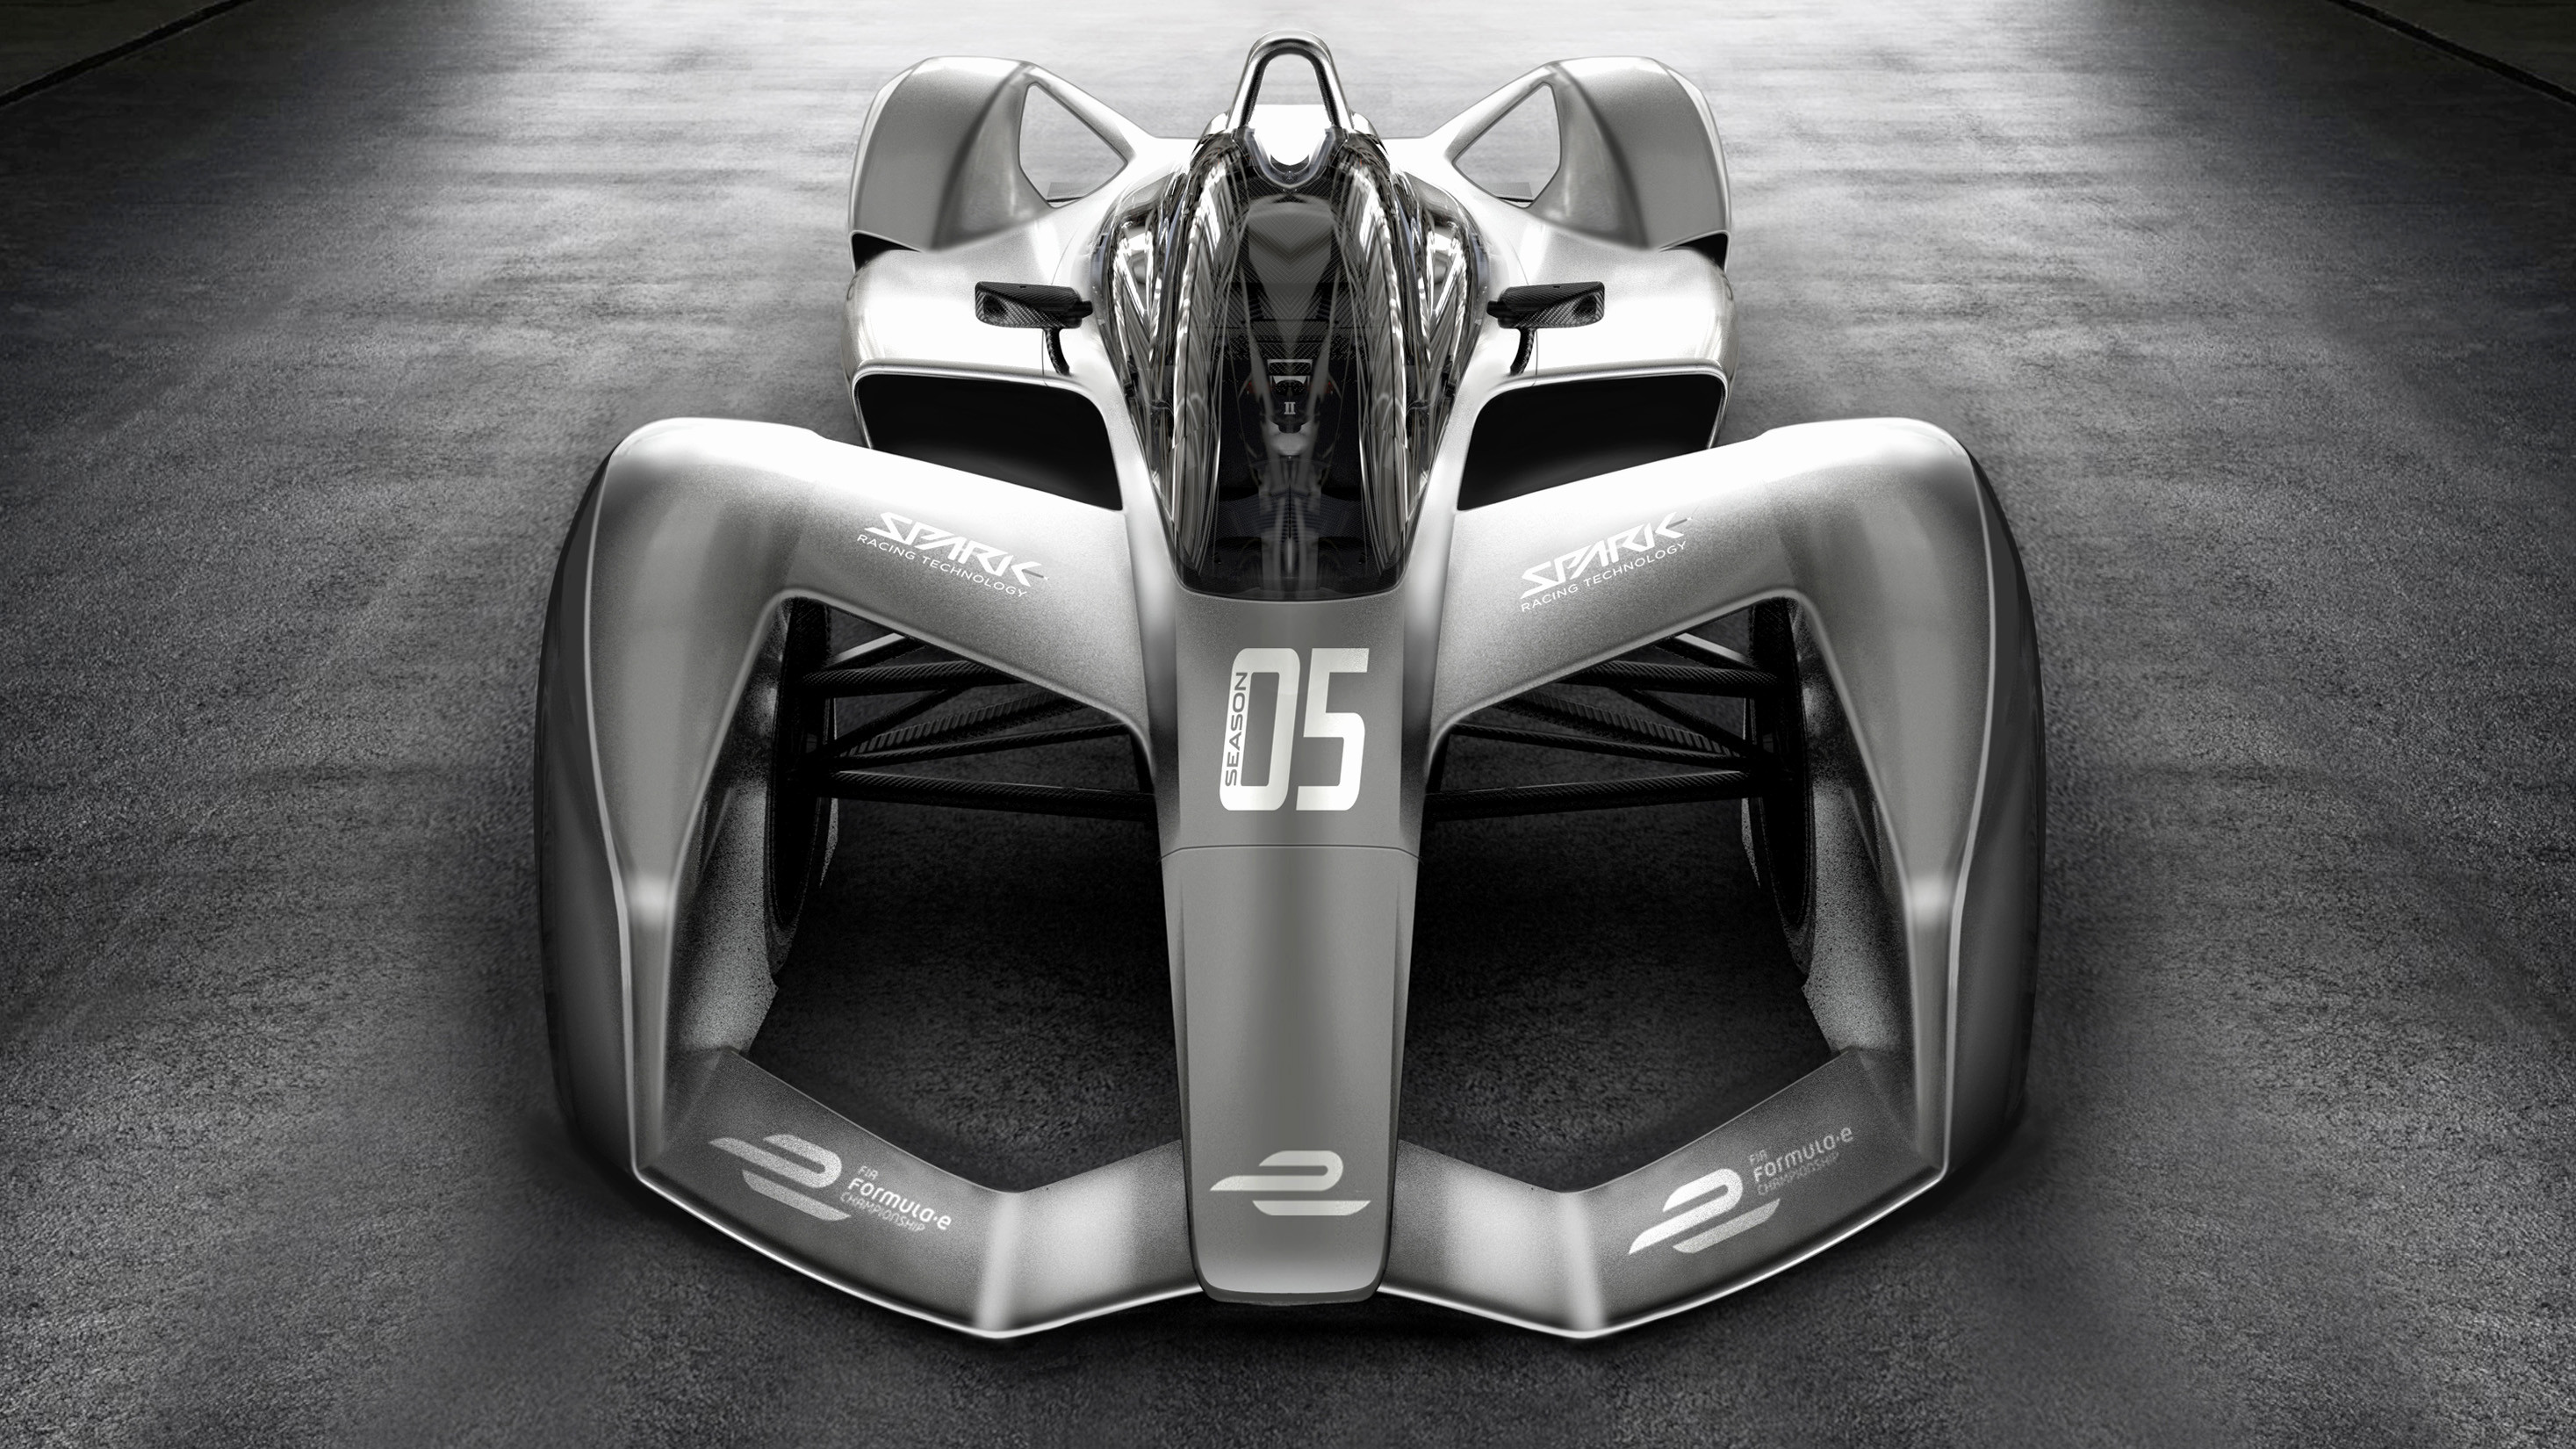 2934x1650 Racing Cars Live Wallpapers Luxury New Concept Images Show Just How Crazy  formula Es Race Cars